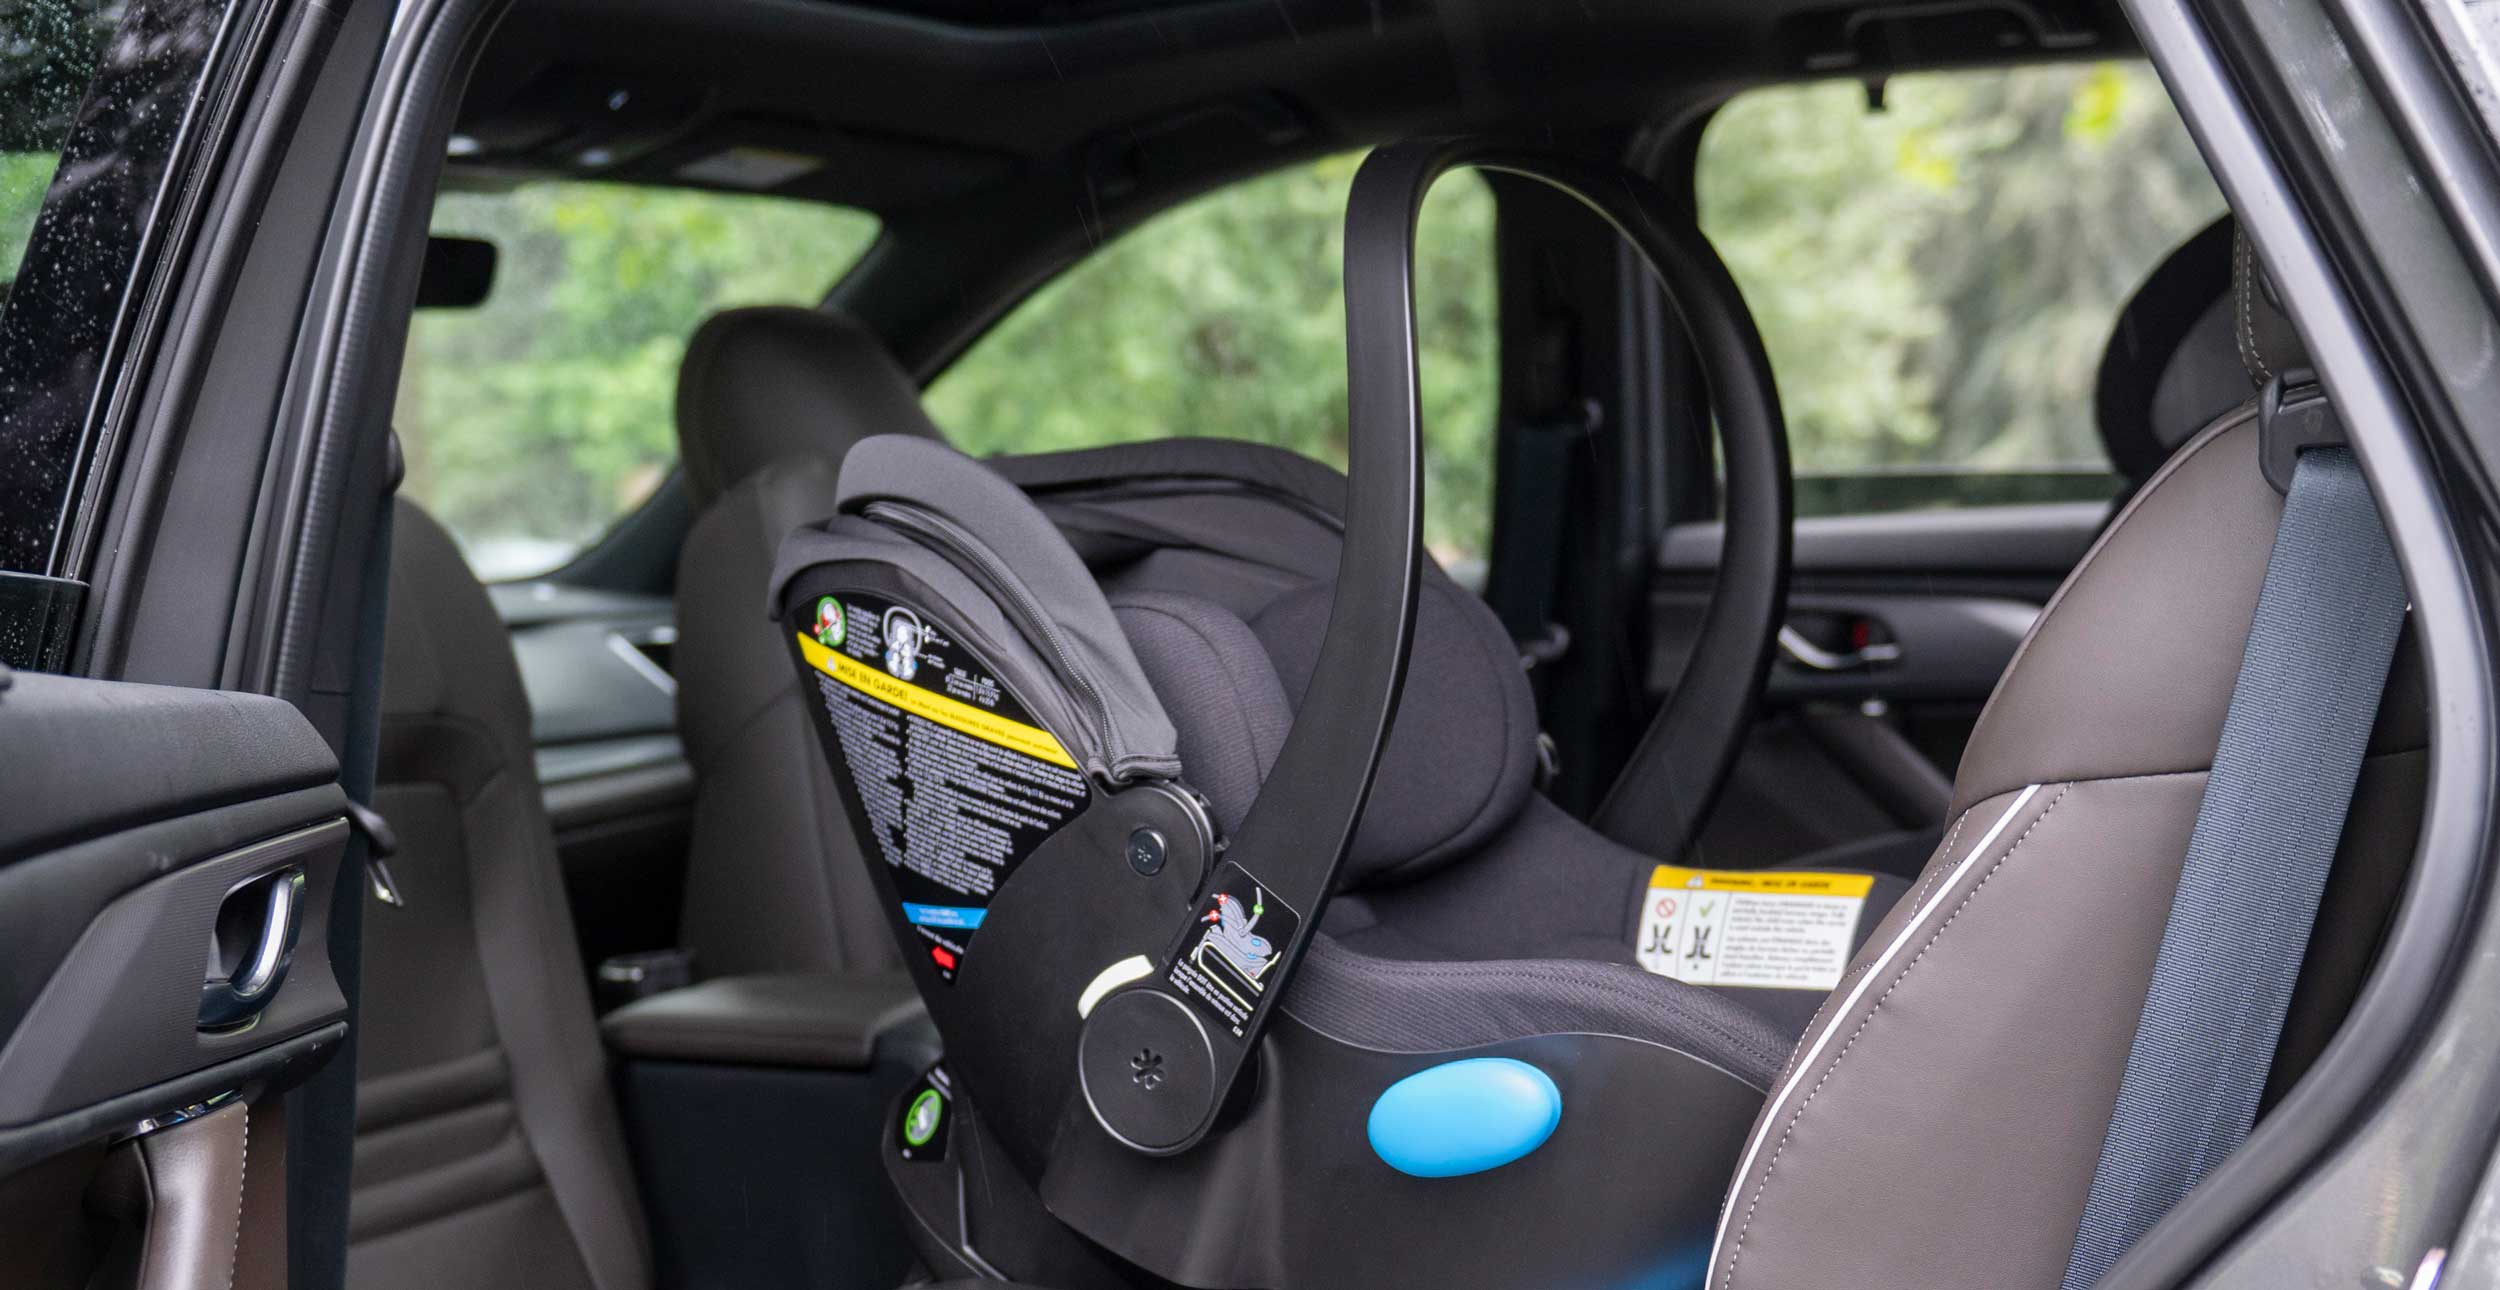 Clek Liing Infant Car Seat in railroad flame-retardant free fabric installed in a vehicle